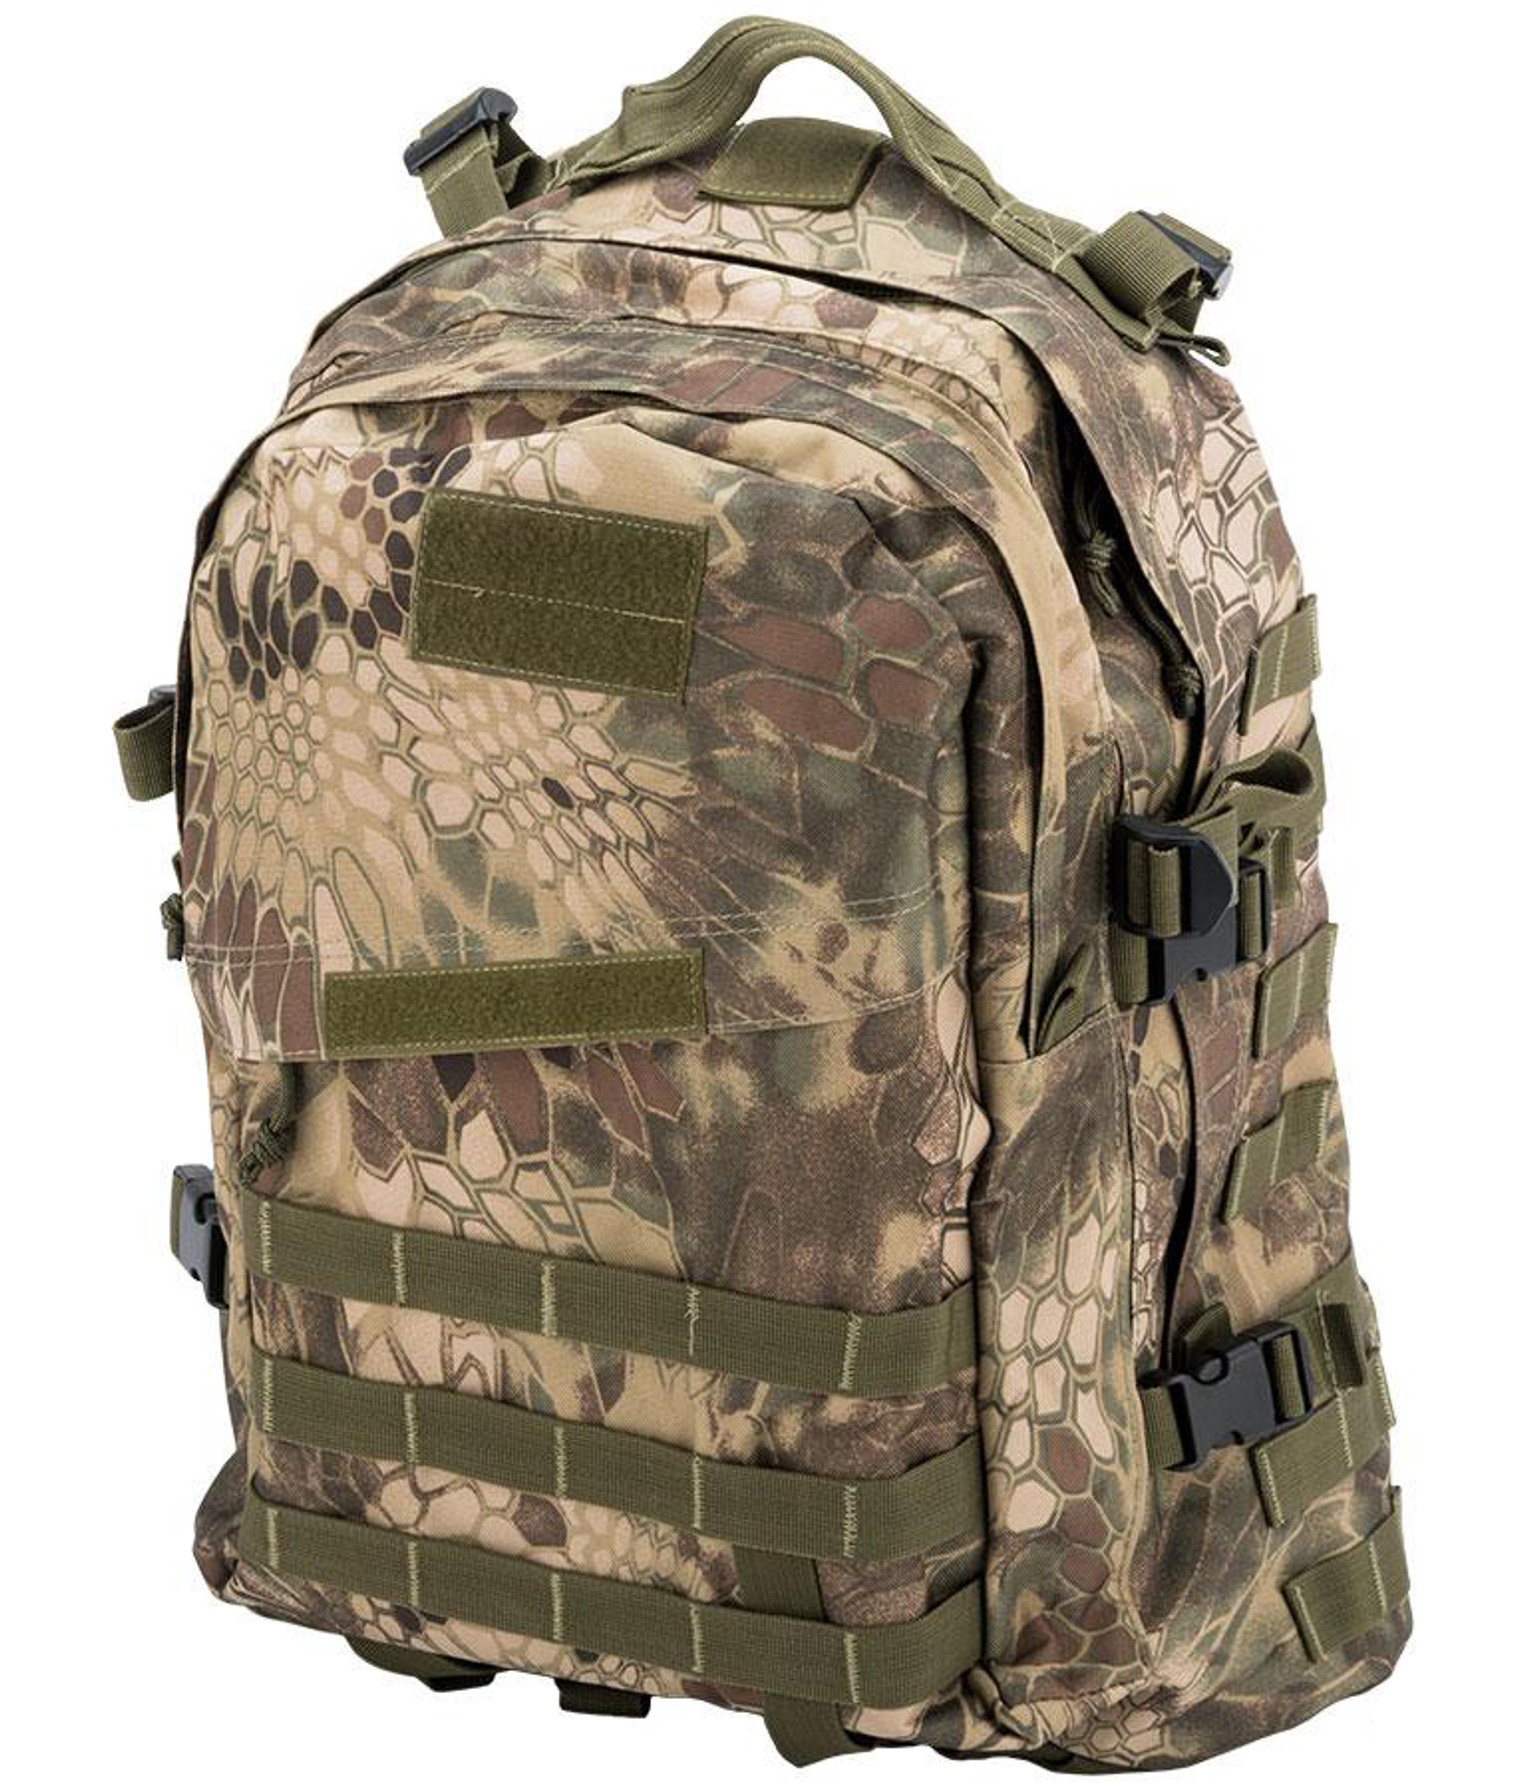 Tac Crew EDC Bugout Backpack (Color: Kryptic Camo)